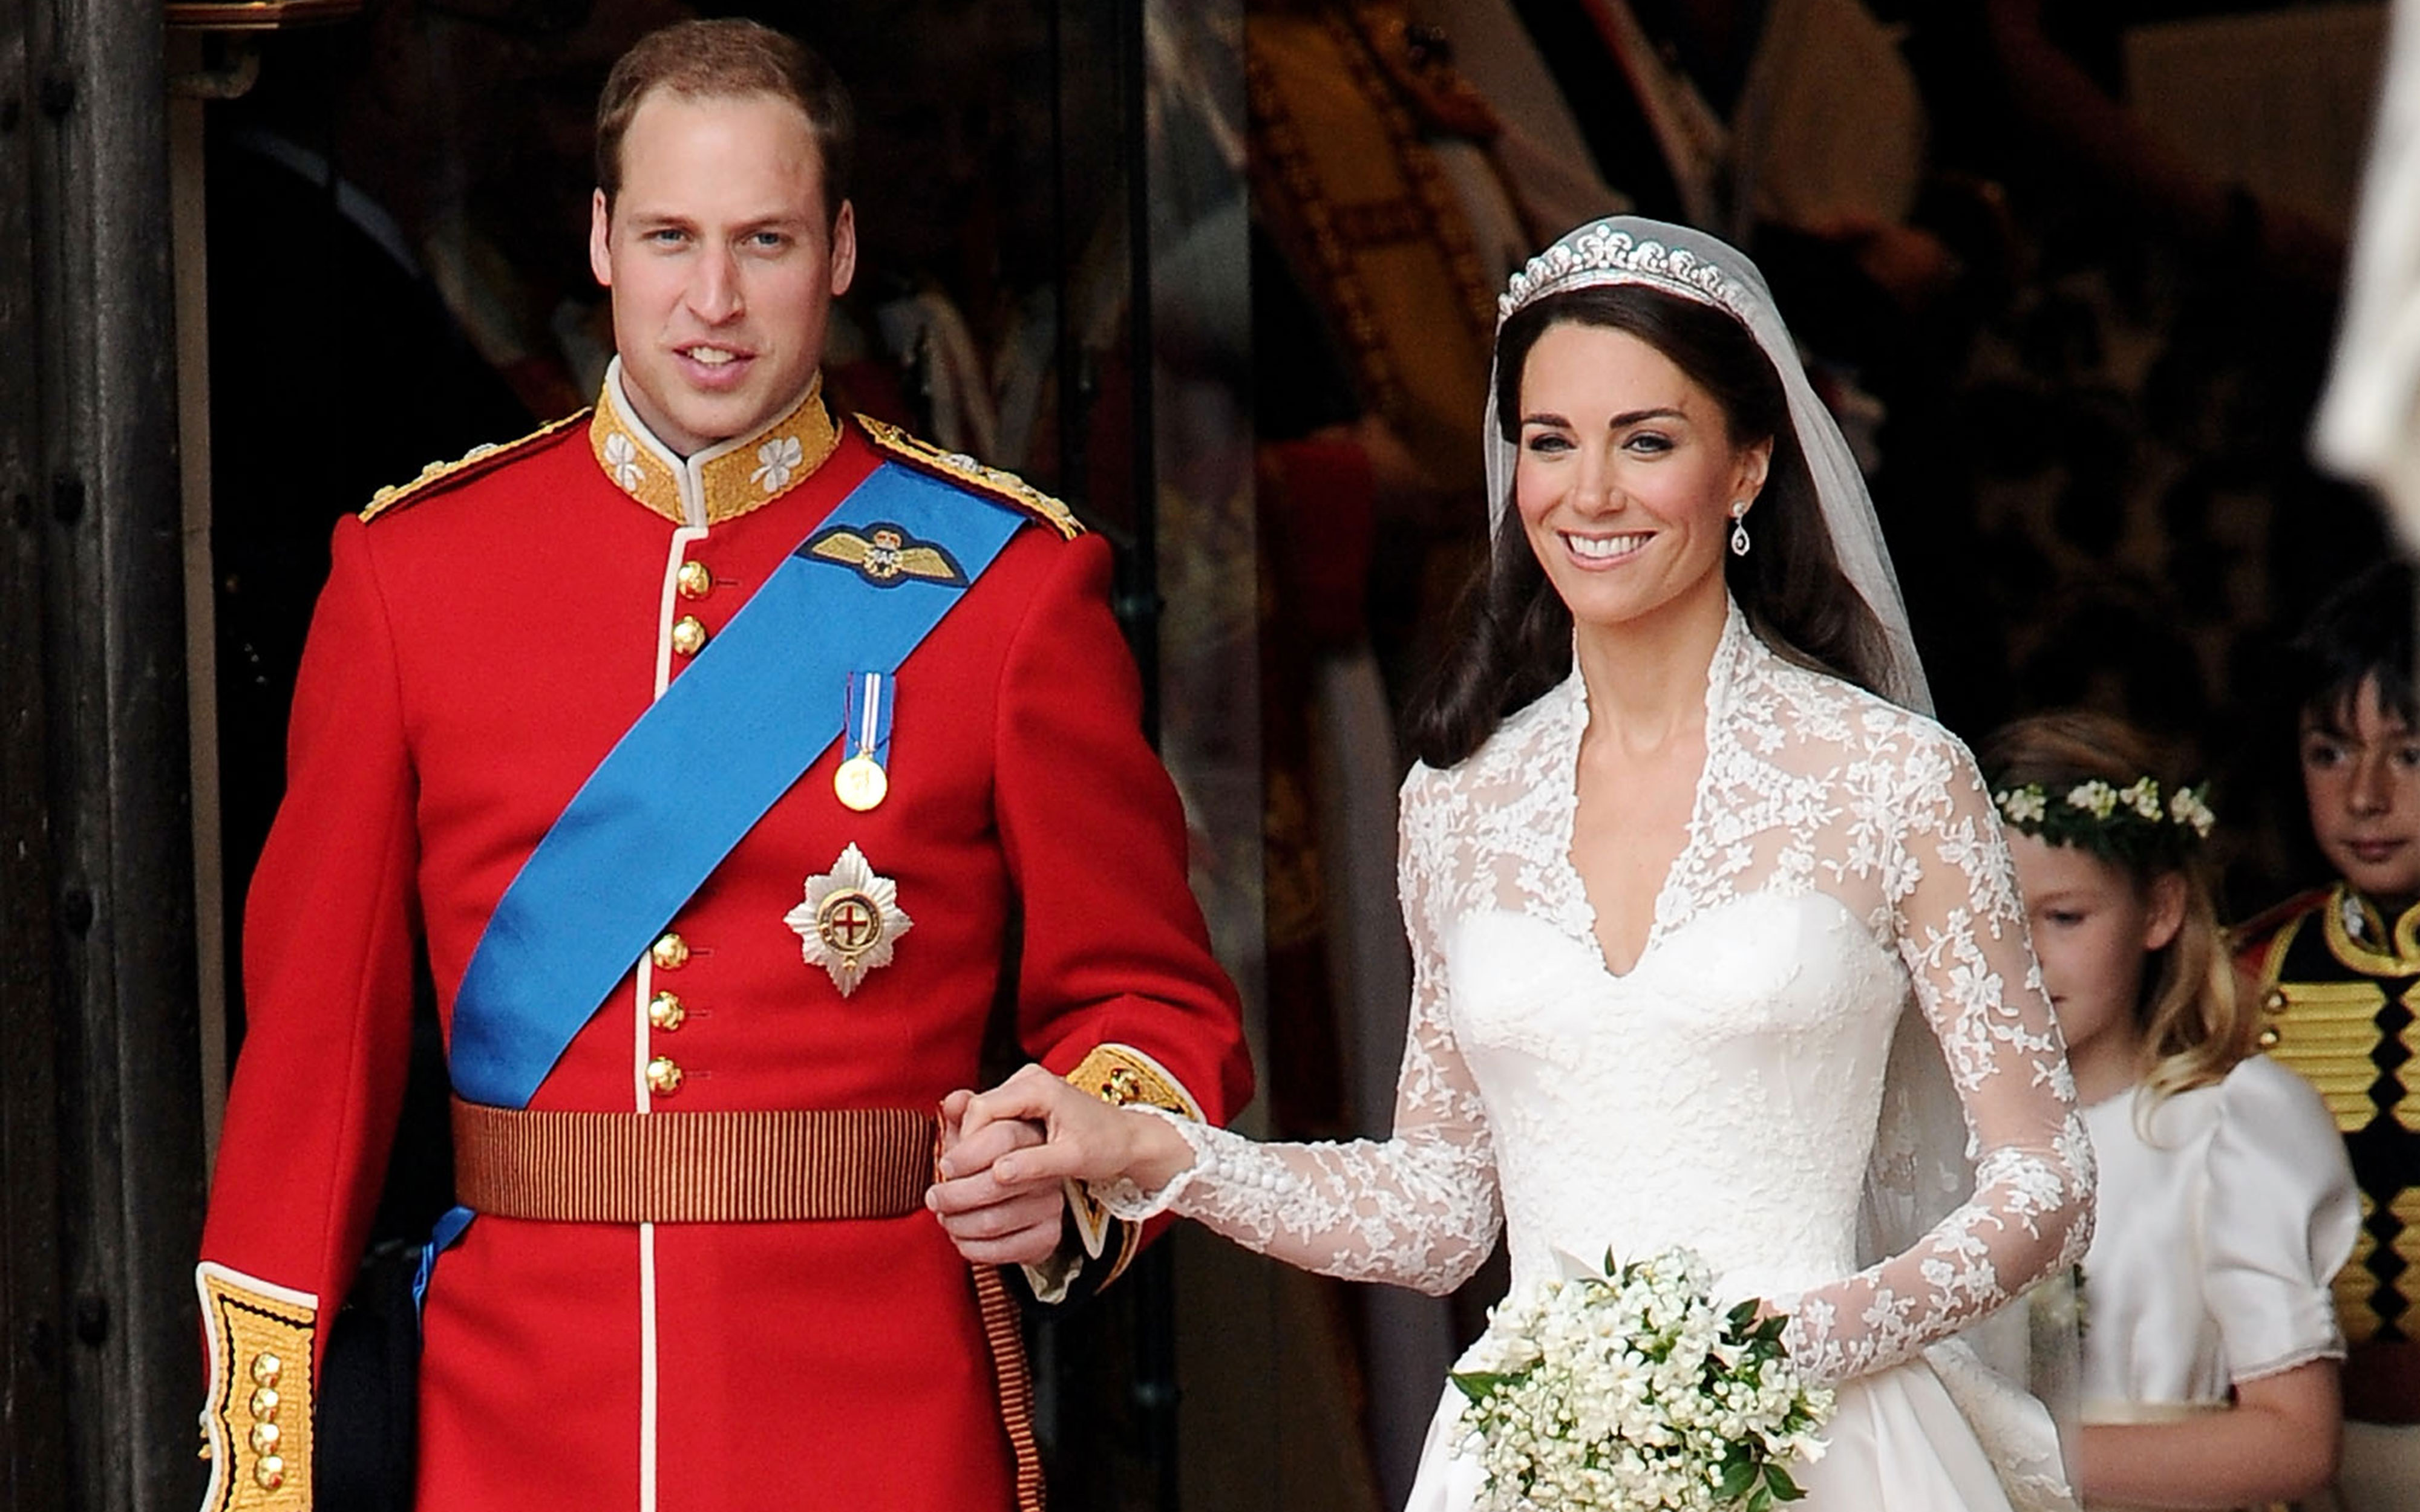 8 Behind-the-Scenes Details From Will and Kate’s Royal Wedding